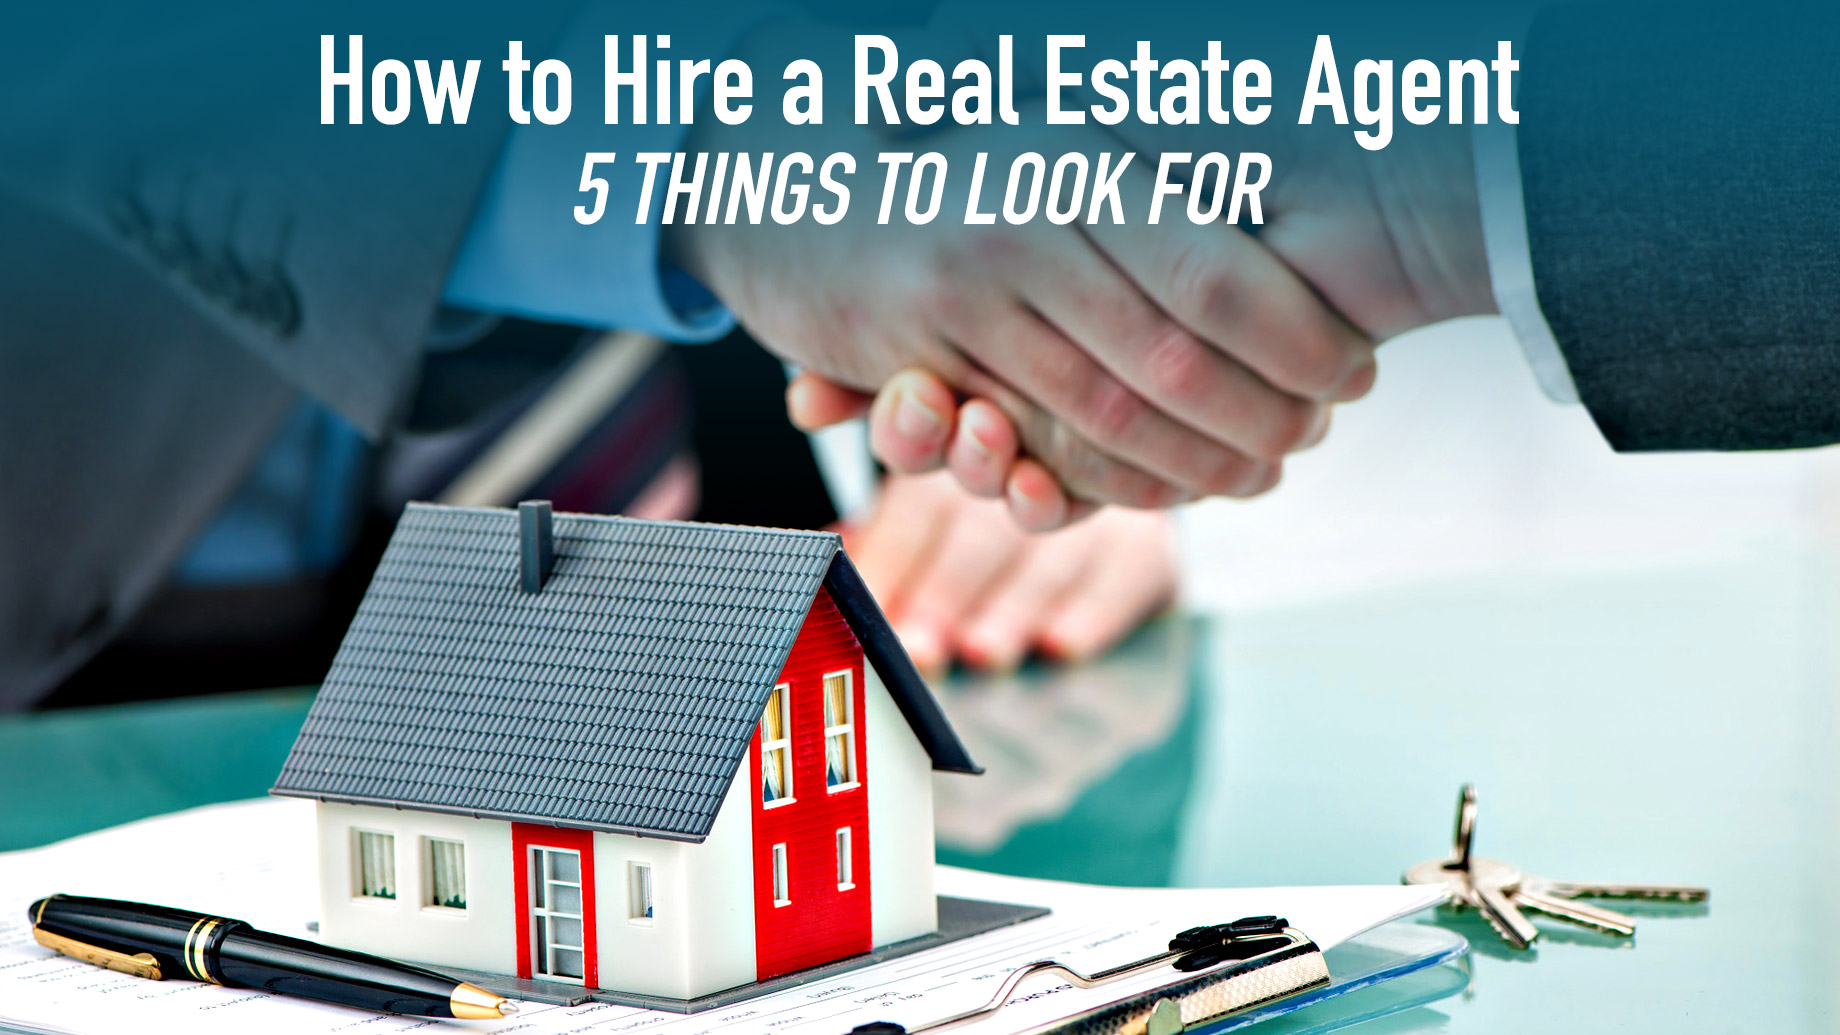 How to Hire a Real Estate Agent: 5 Things to Look For